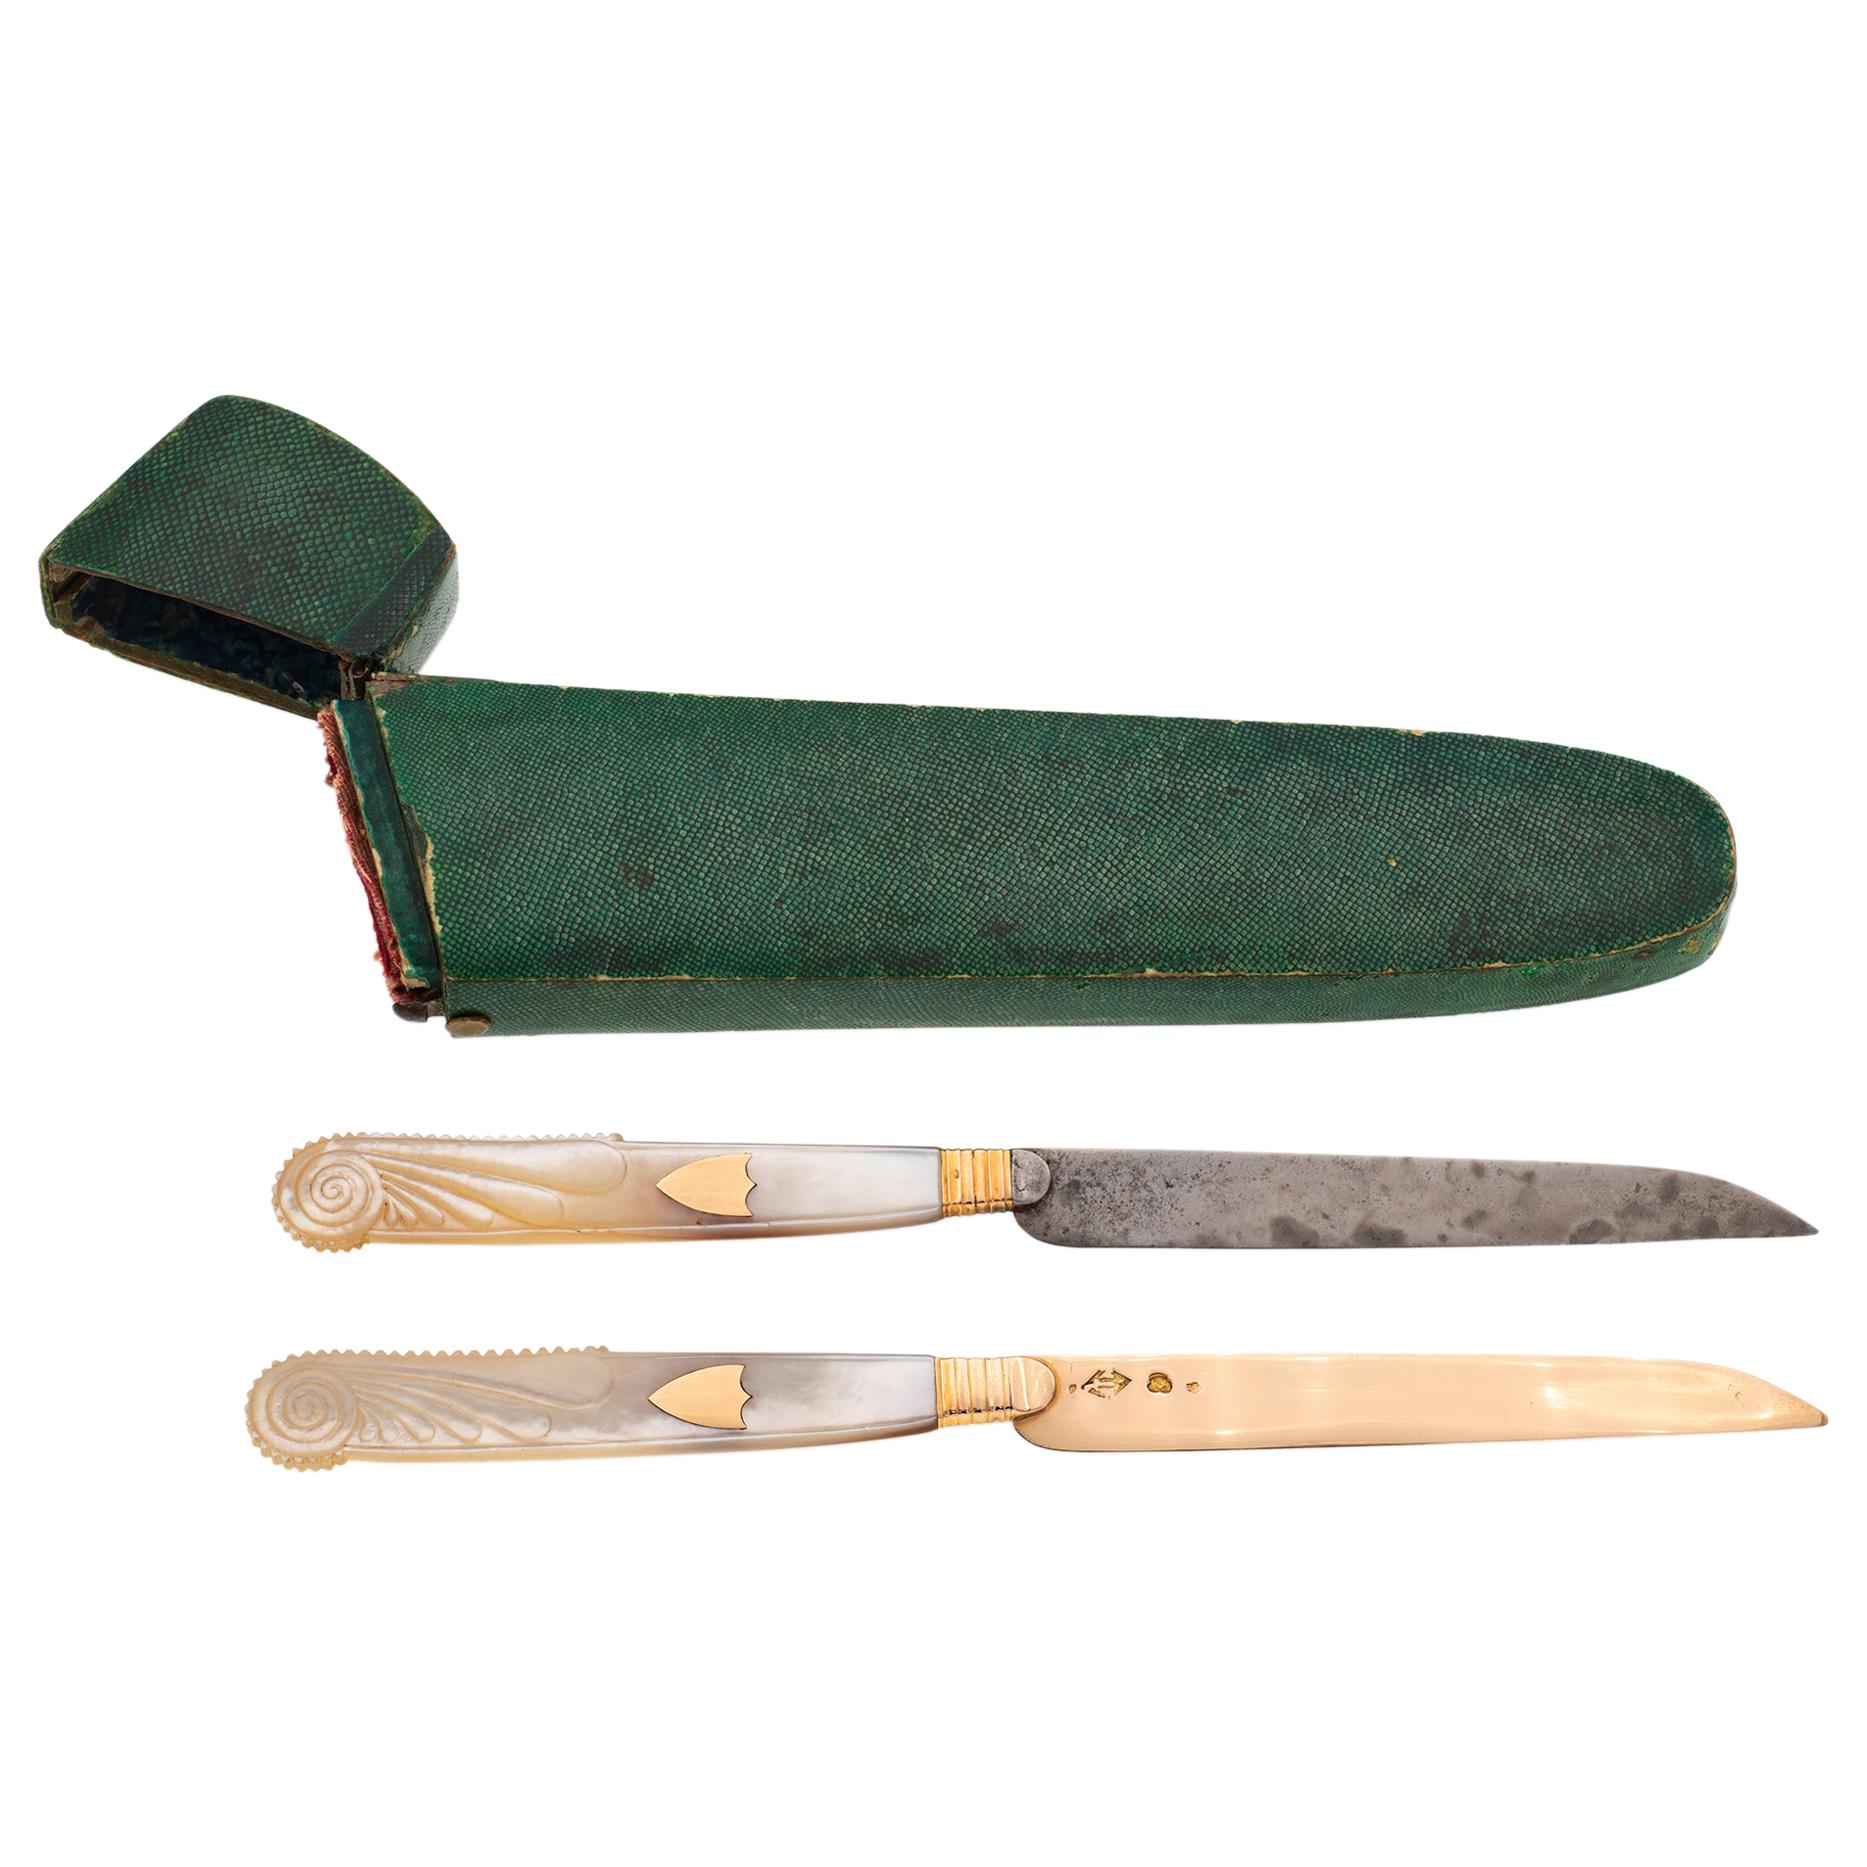 https://a.1stdibscdn.com/pair-of-french-knives-in-a-shagreen-case-for-sale/1121189/j_117810221616002300073/11781022_master.jpg